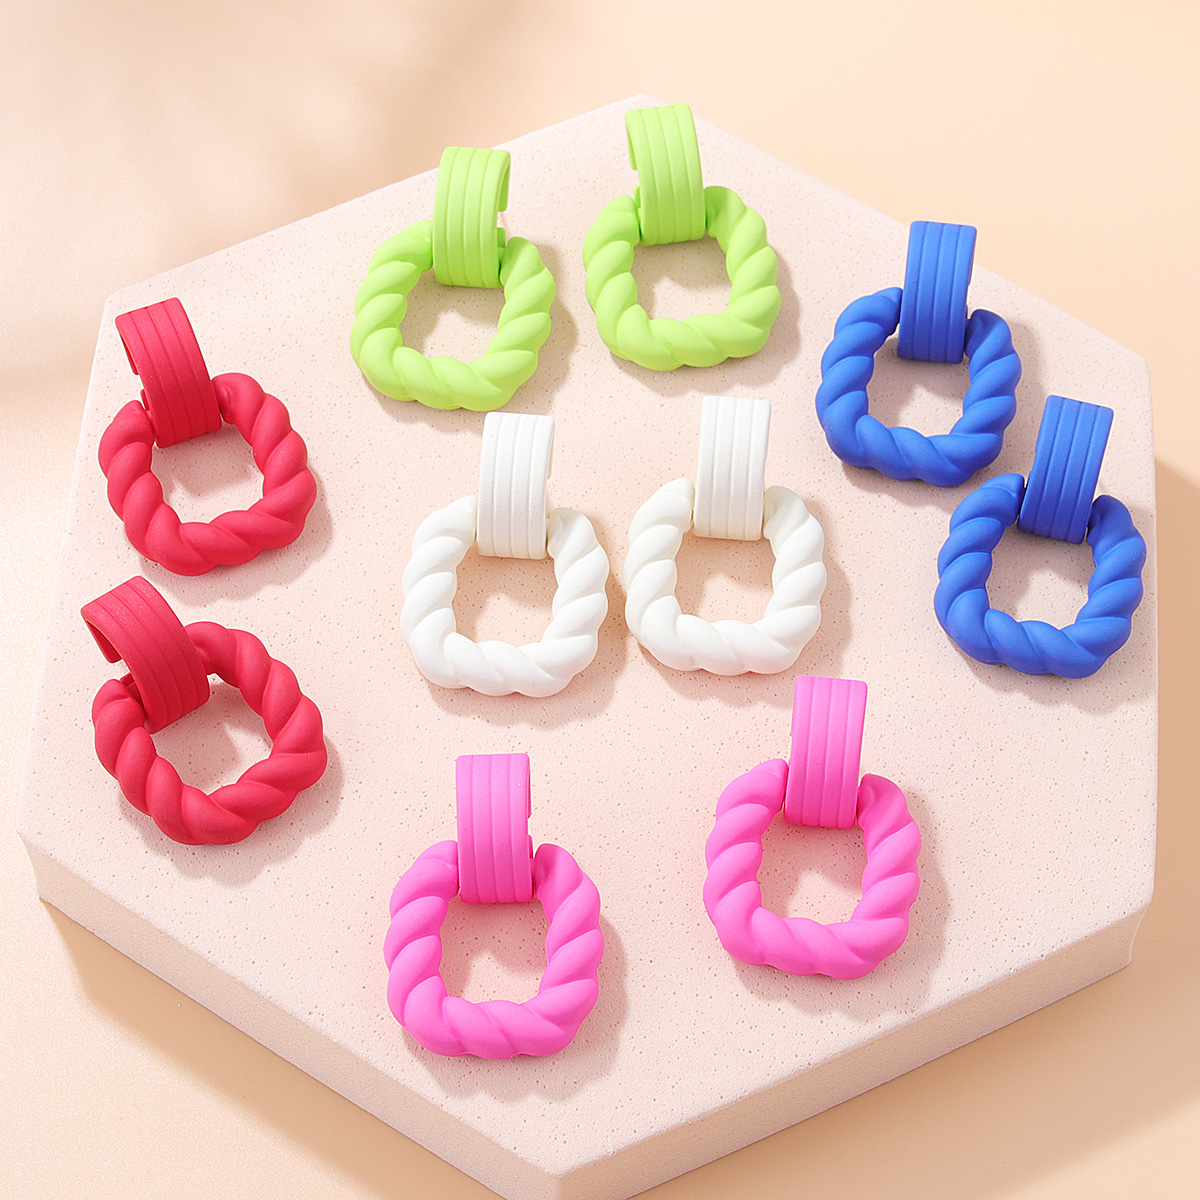 2022 New Fashion Geometric Candy Color Acrylic Rubber Effect Paint Square Twist Earringspicture7